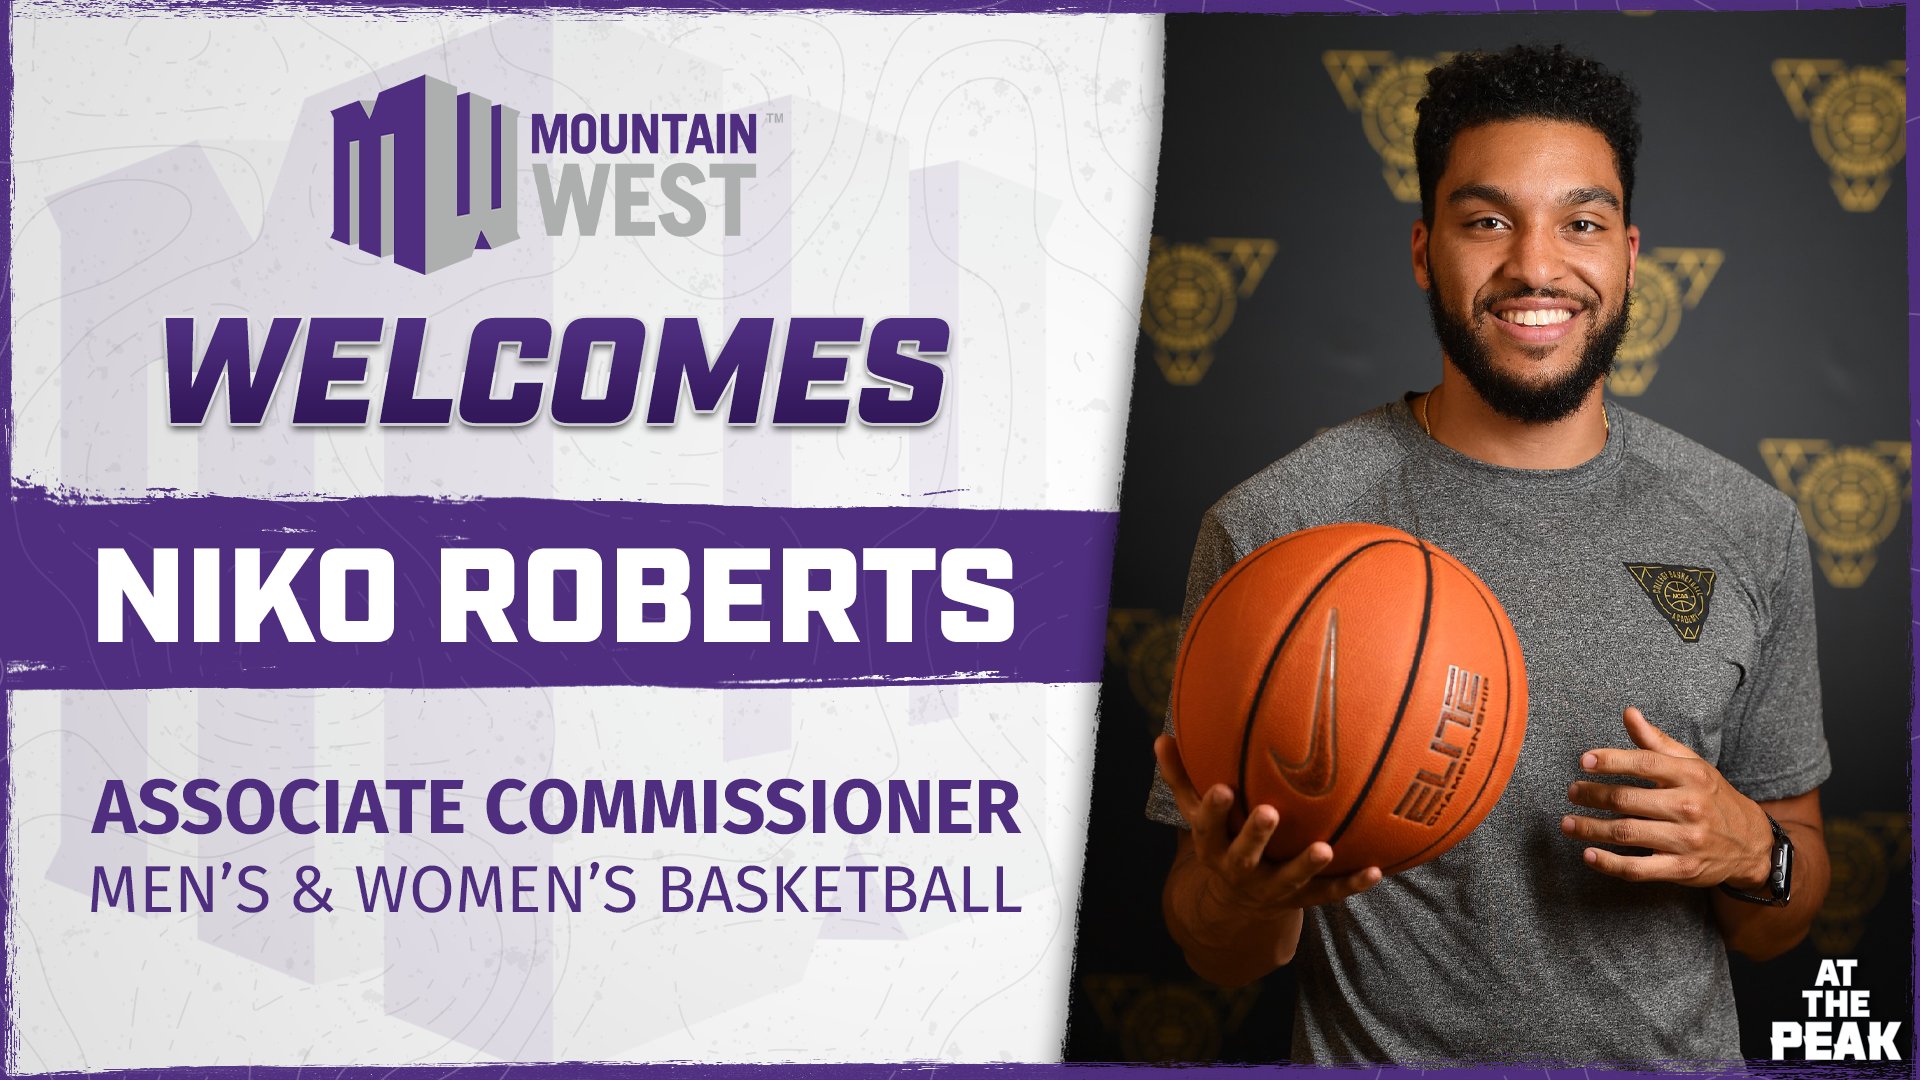 Paseo Distracción transferir Mountain West on Twitter: "NEWS: The Mountain West welcomes Niko Roberts as  the Associate Commissioner of Men's &amp; Women's Basketball 📰:  https://t.co/UsEsvOzNDZ #AtThePeak | #MWMBB | #MWWBB  https://t.co/H0lVhxV8xE" / Twitter